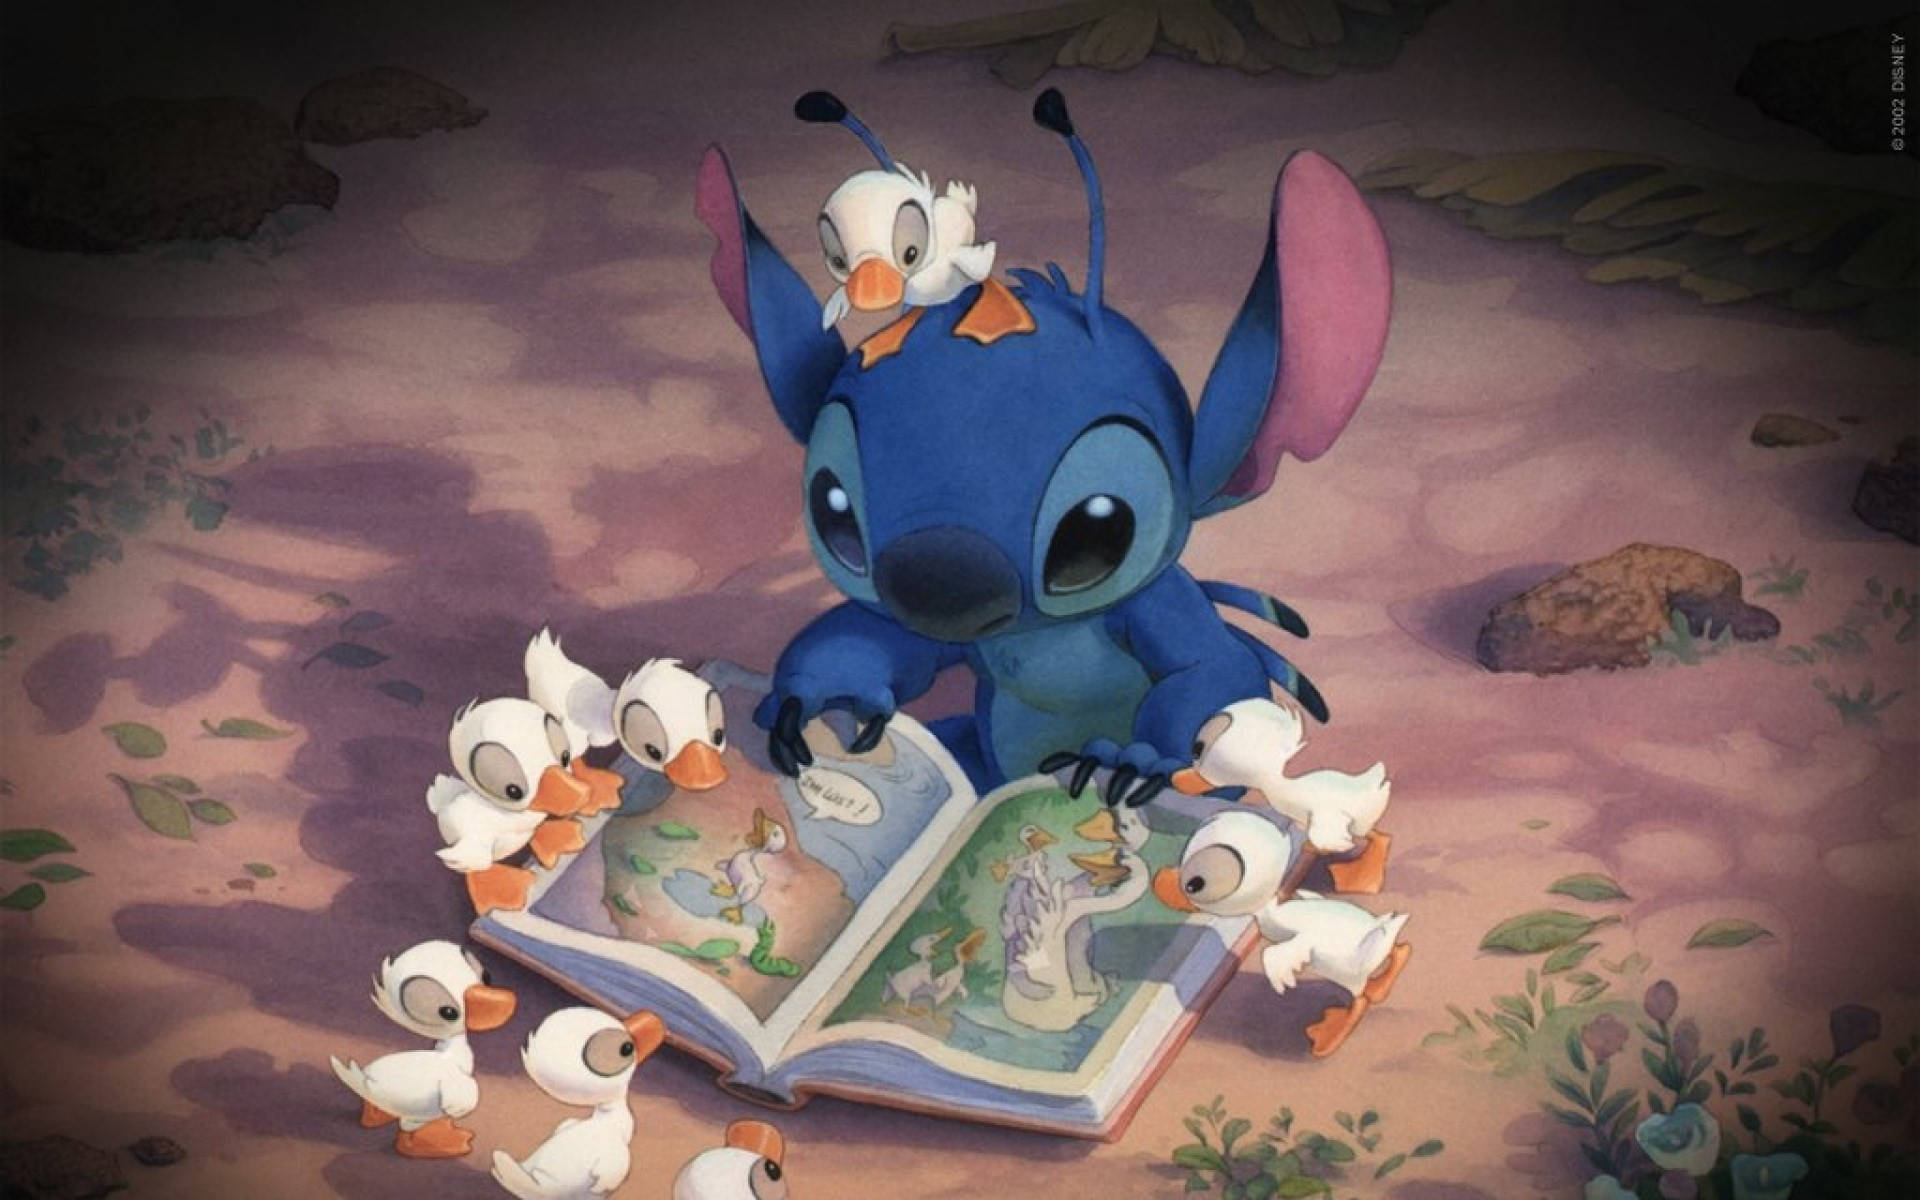 Stitch From Disney With Ducklings